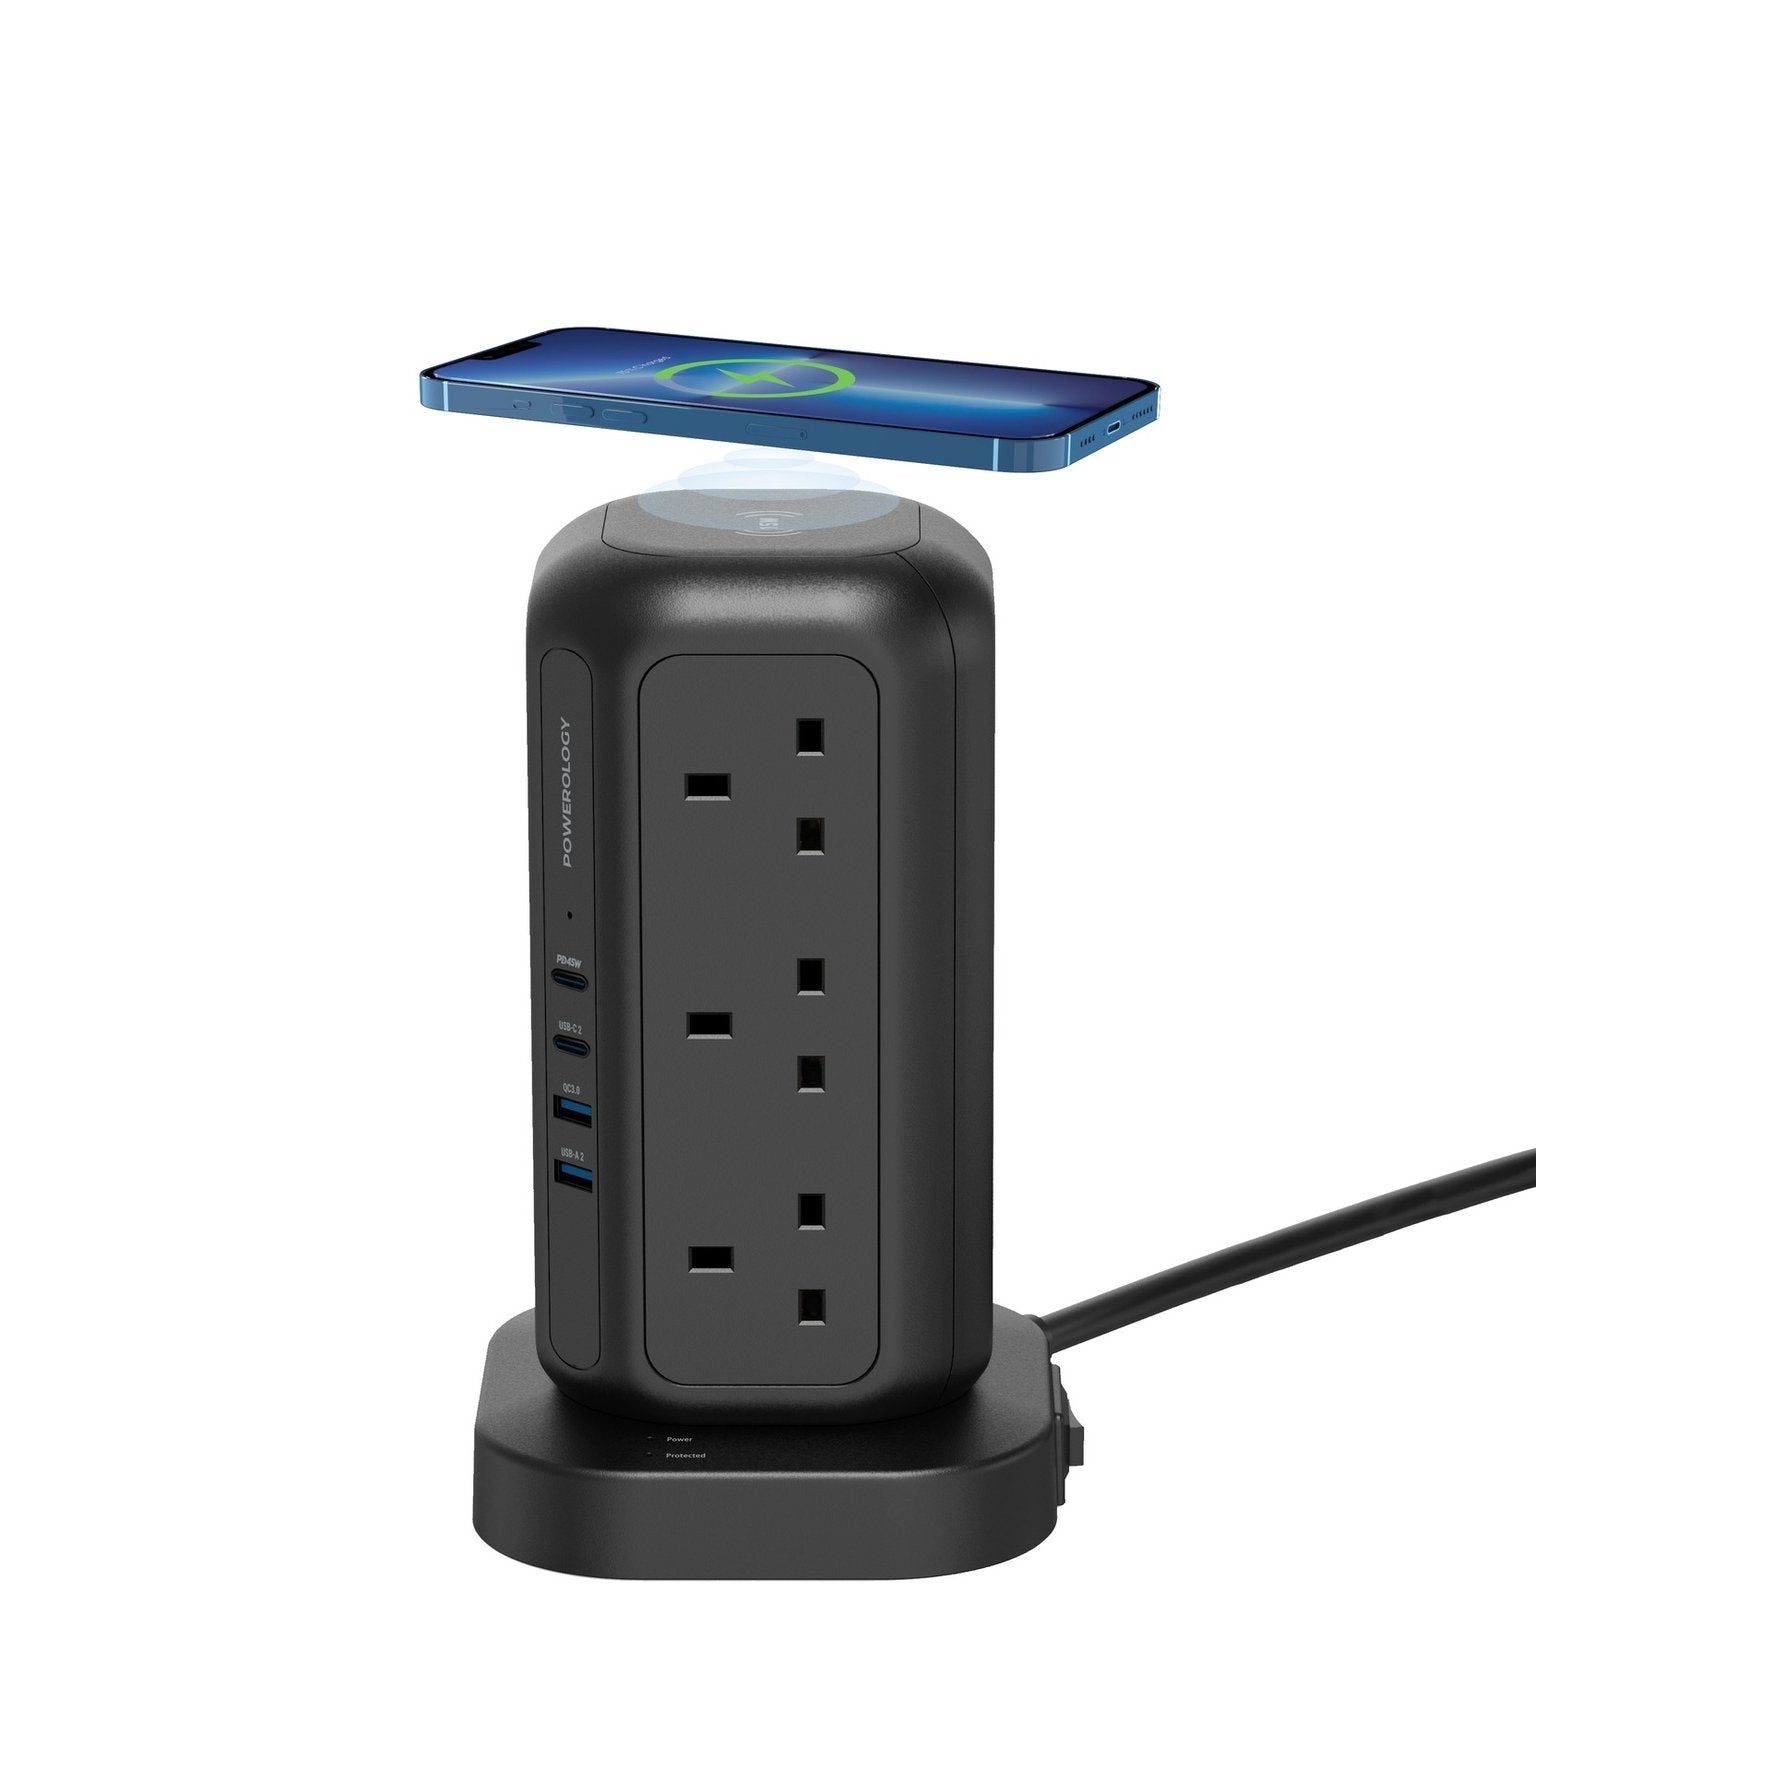 Powerology 12 Socket Multi-Port Tower Hub on the top, featuring a mobile phone